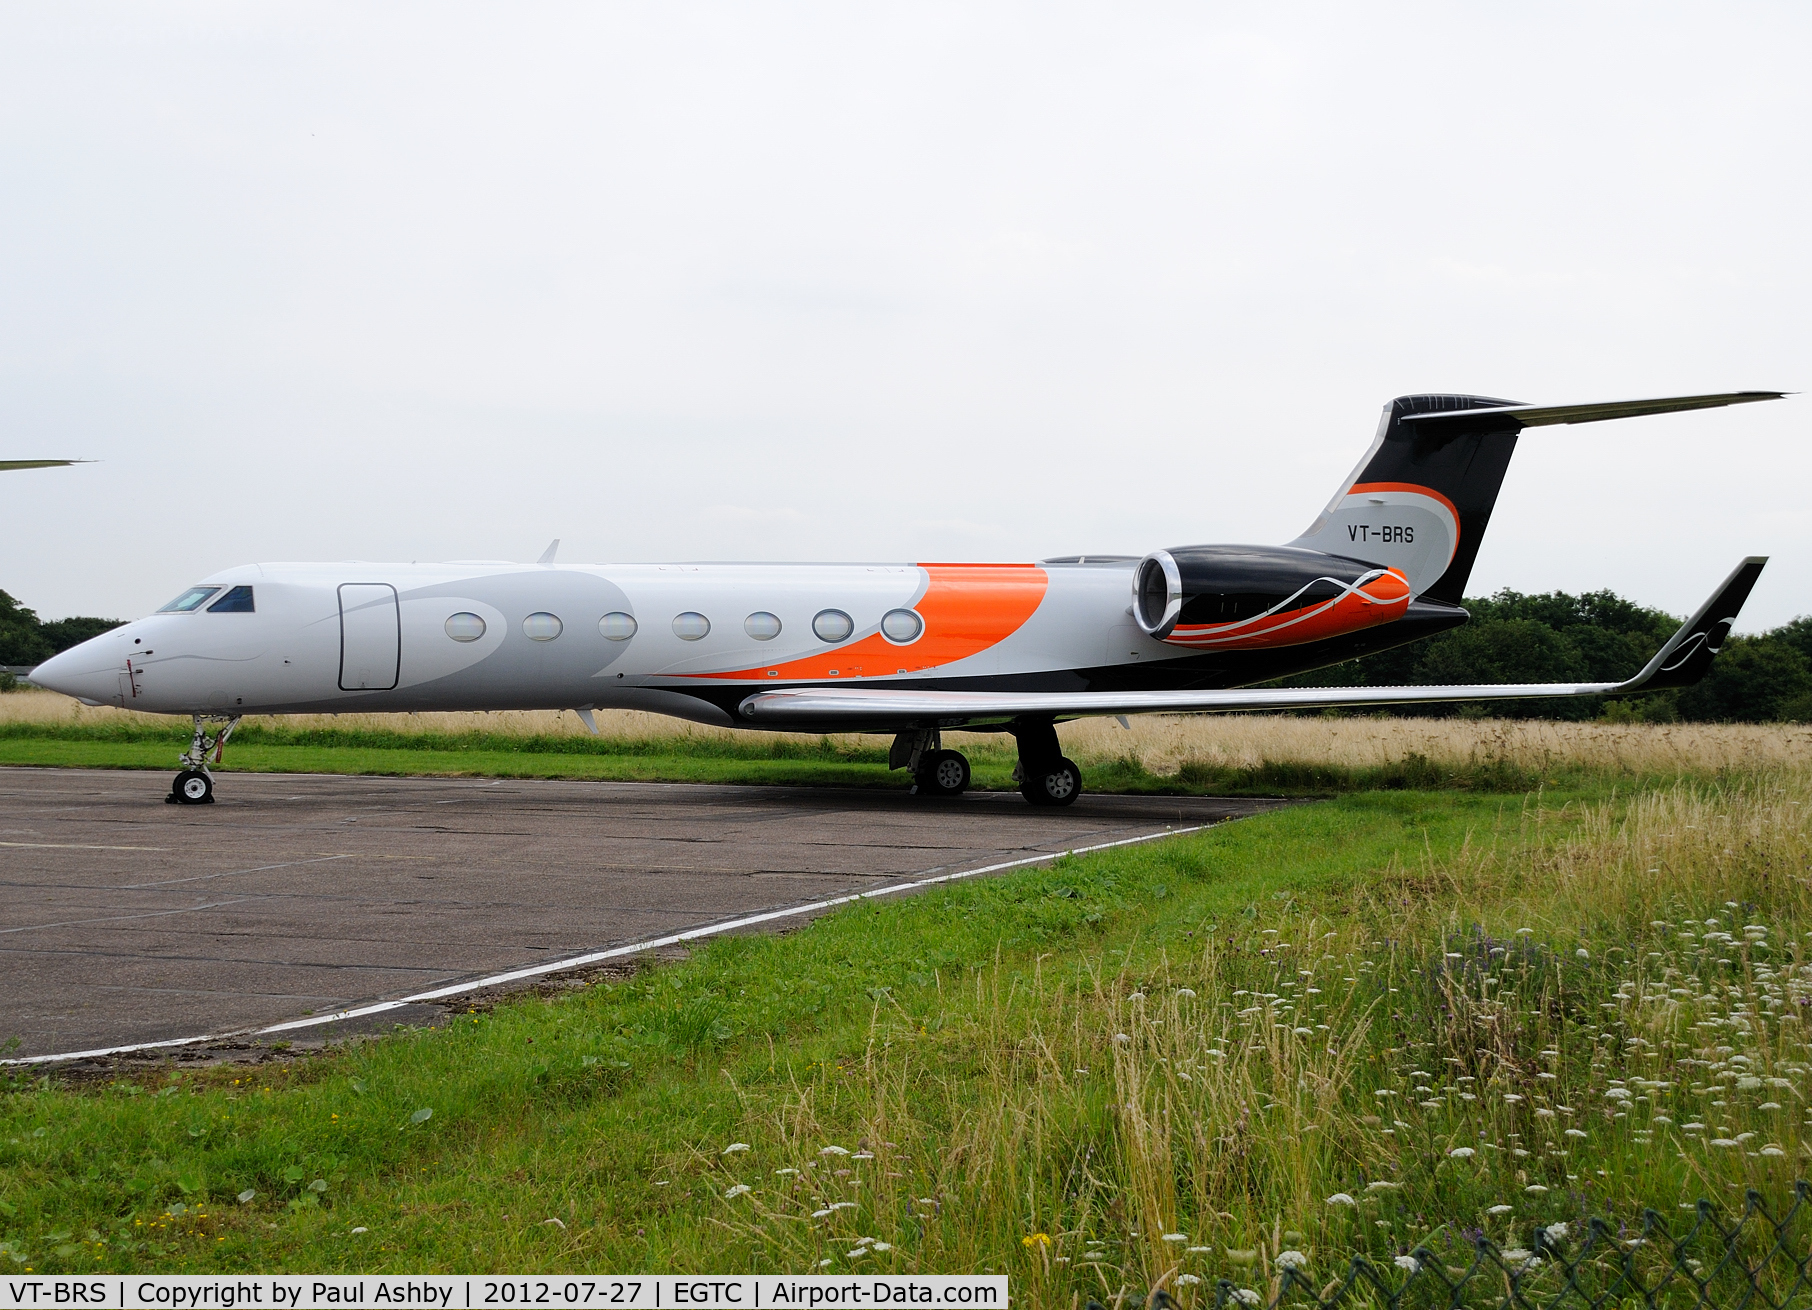 VT-BRS, 2007 Gulfstream Aerospace GV-SP (G550) C/N 5162, Gulfstream V parked at Cranfield during the Olympics